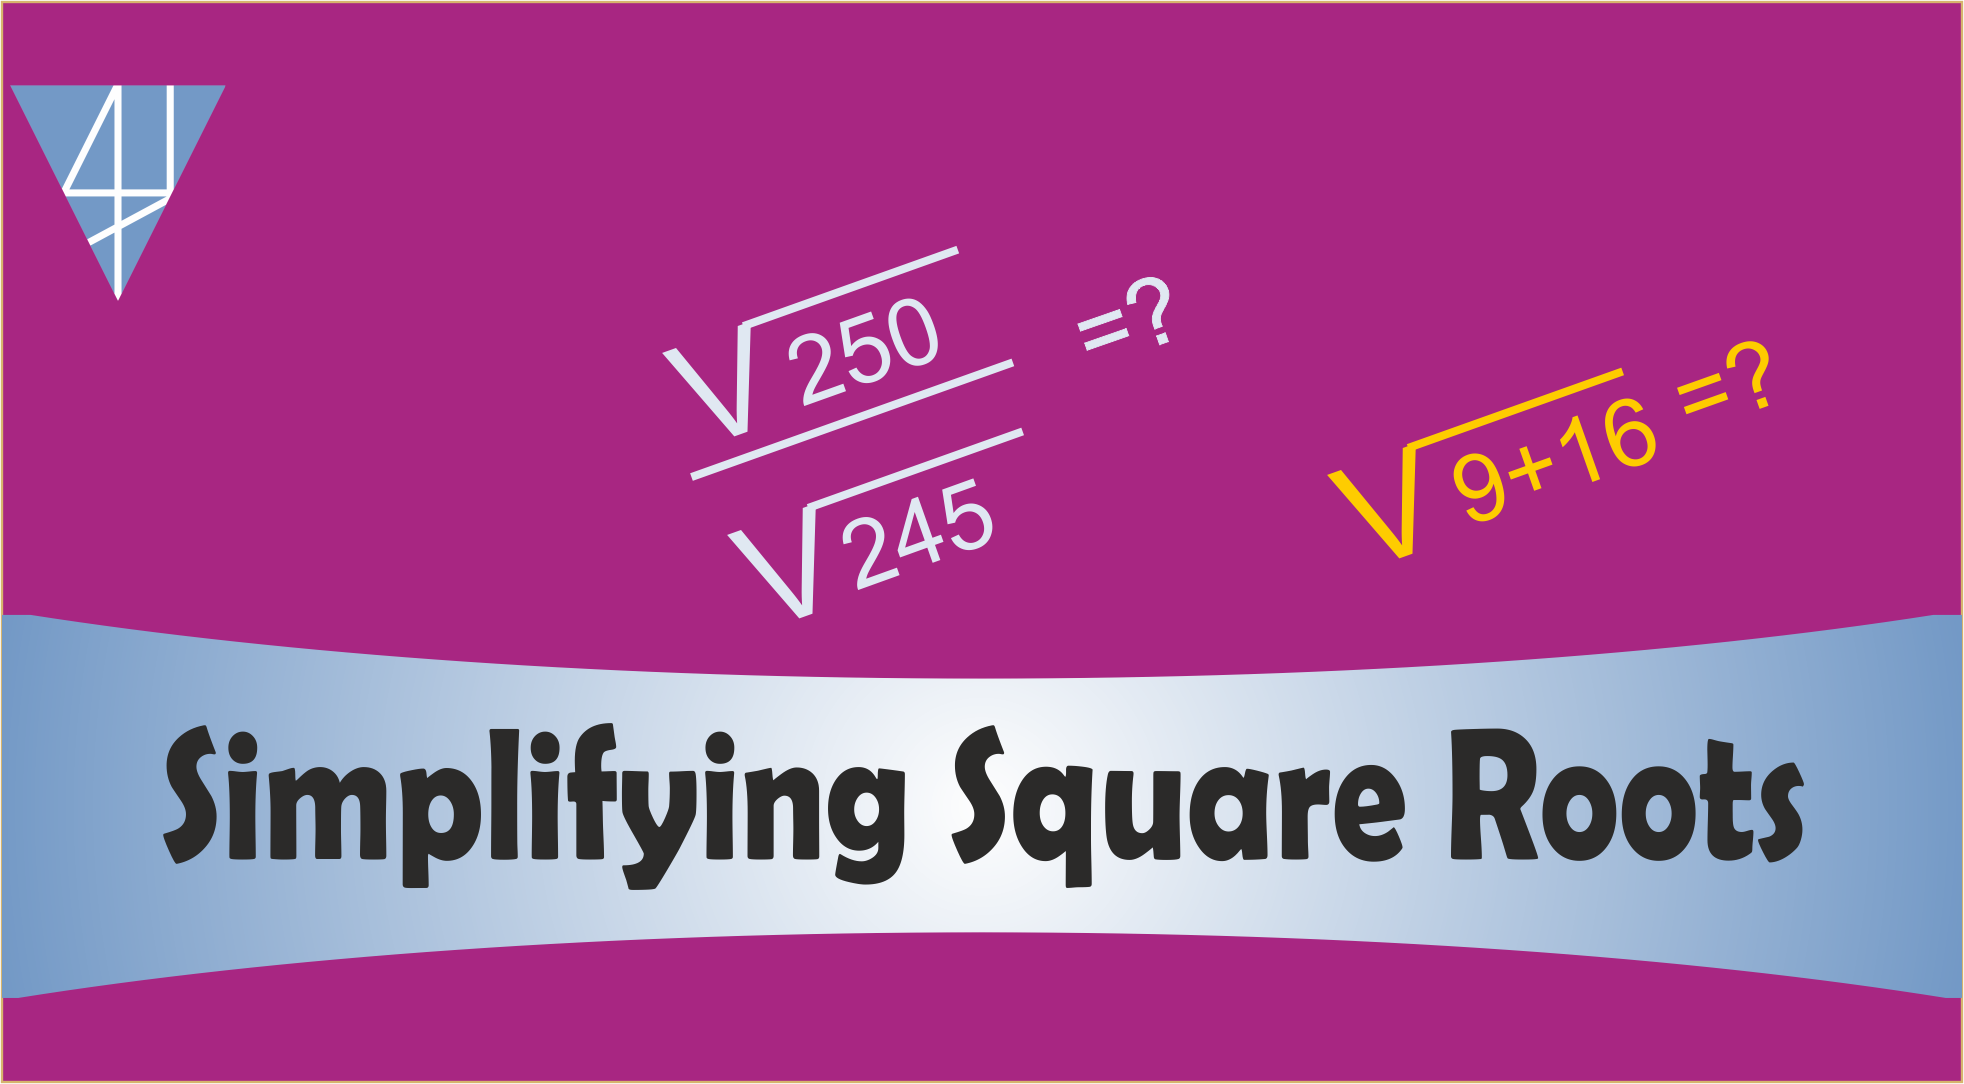 BMS11-Simplifying SquareRoots